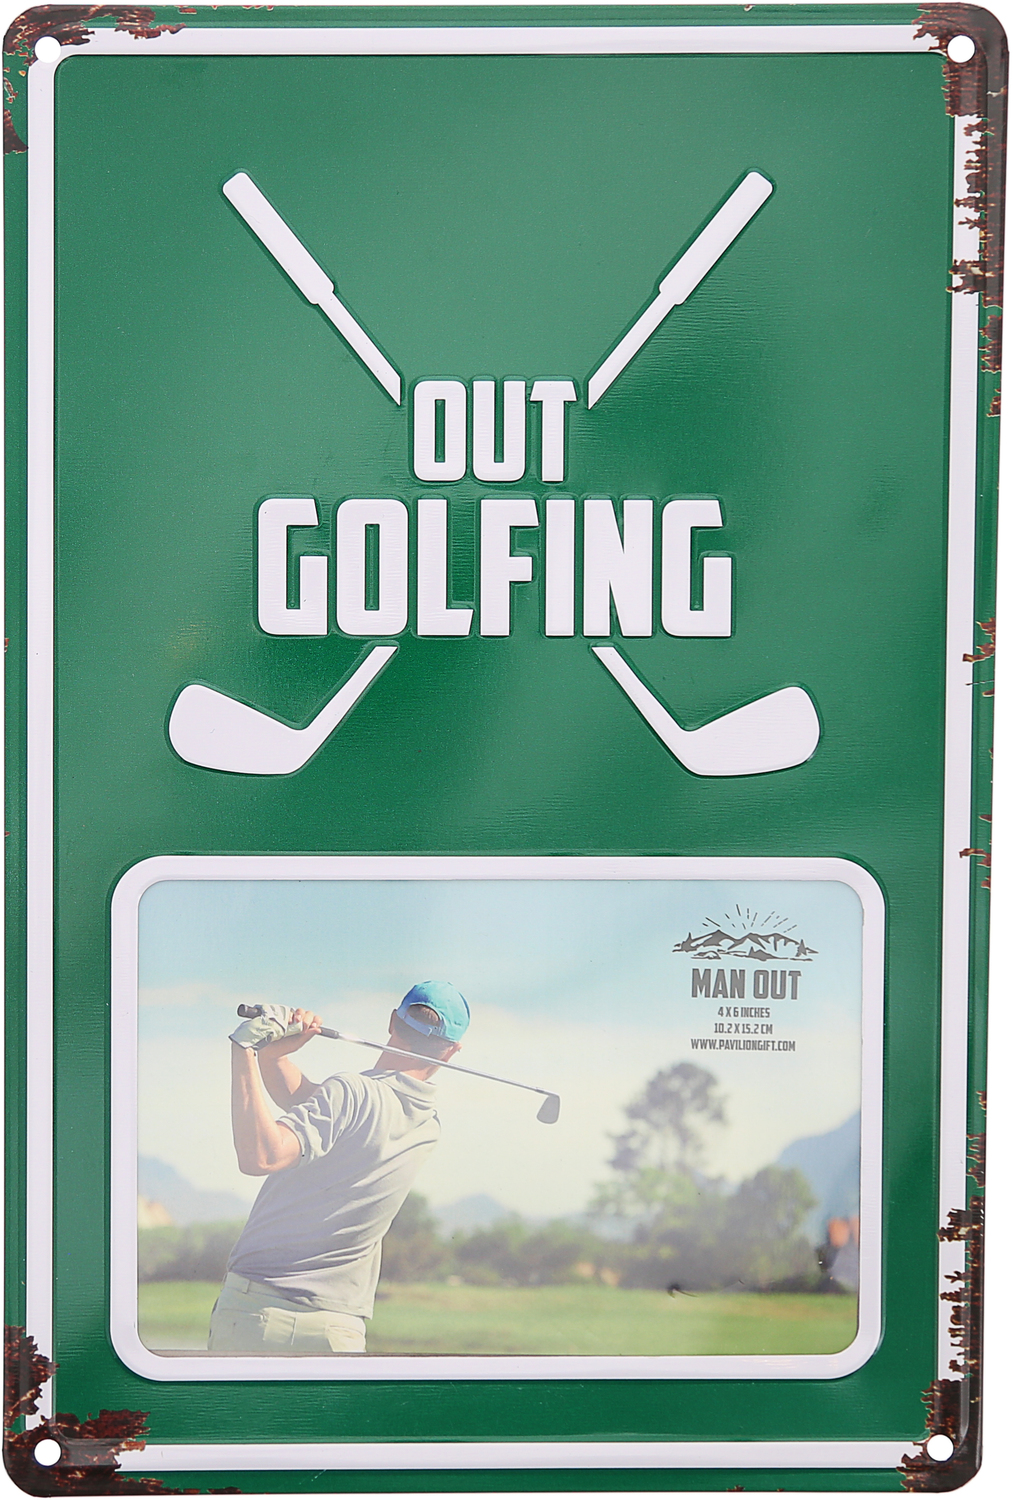 Out Golfing by Man Out - Out Golfing - 8" x 11.75" Tin Frame
(Holds 6" x 4" Photo)